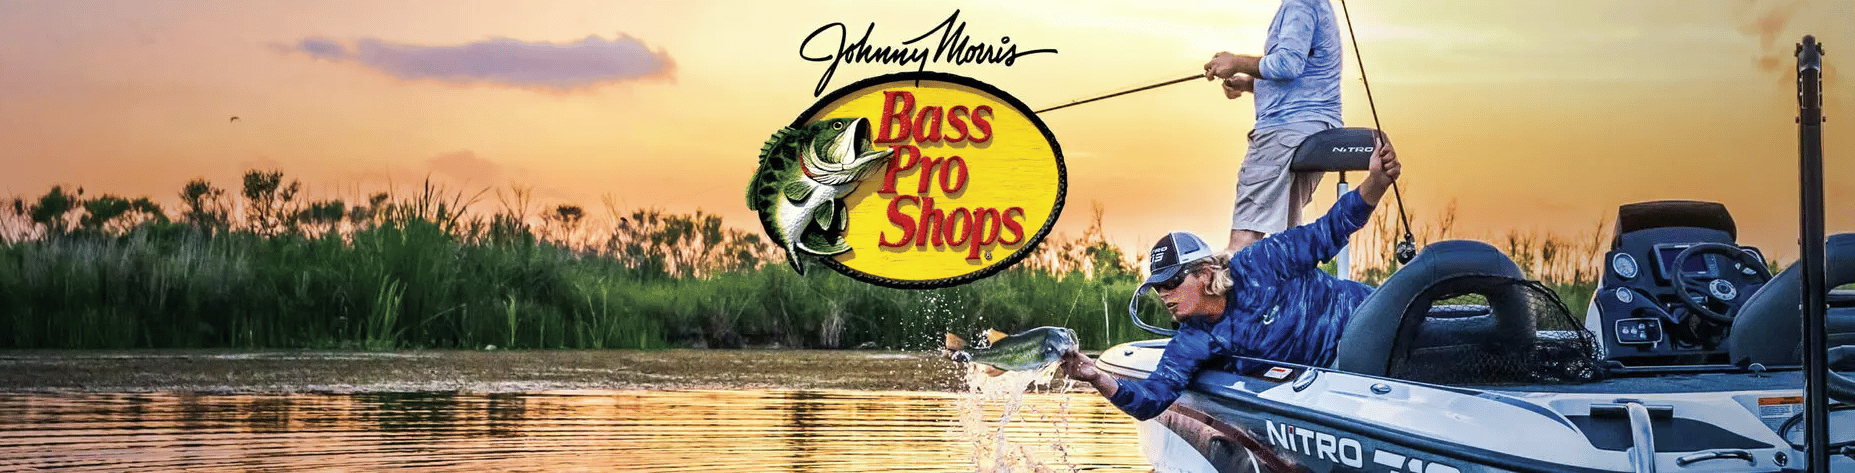 Bass Pro Shops Bat on Water with sunset